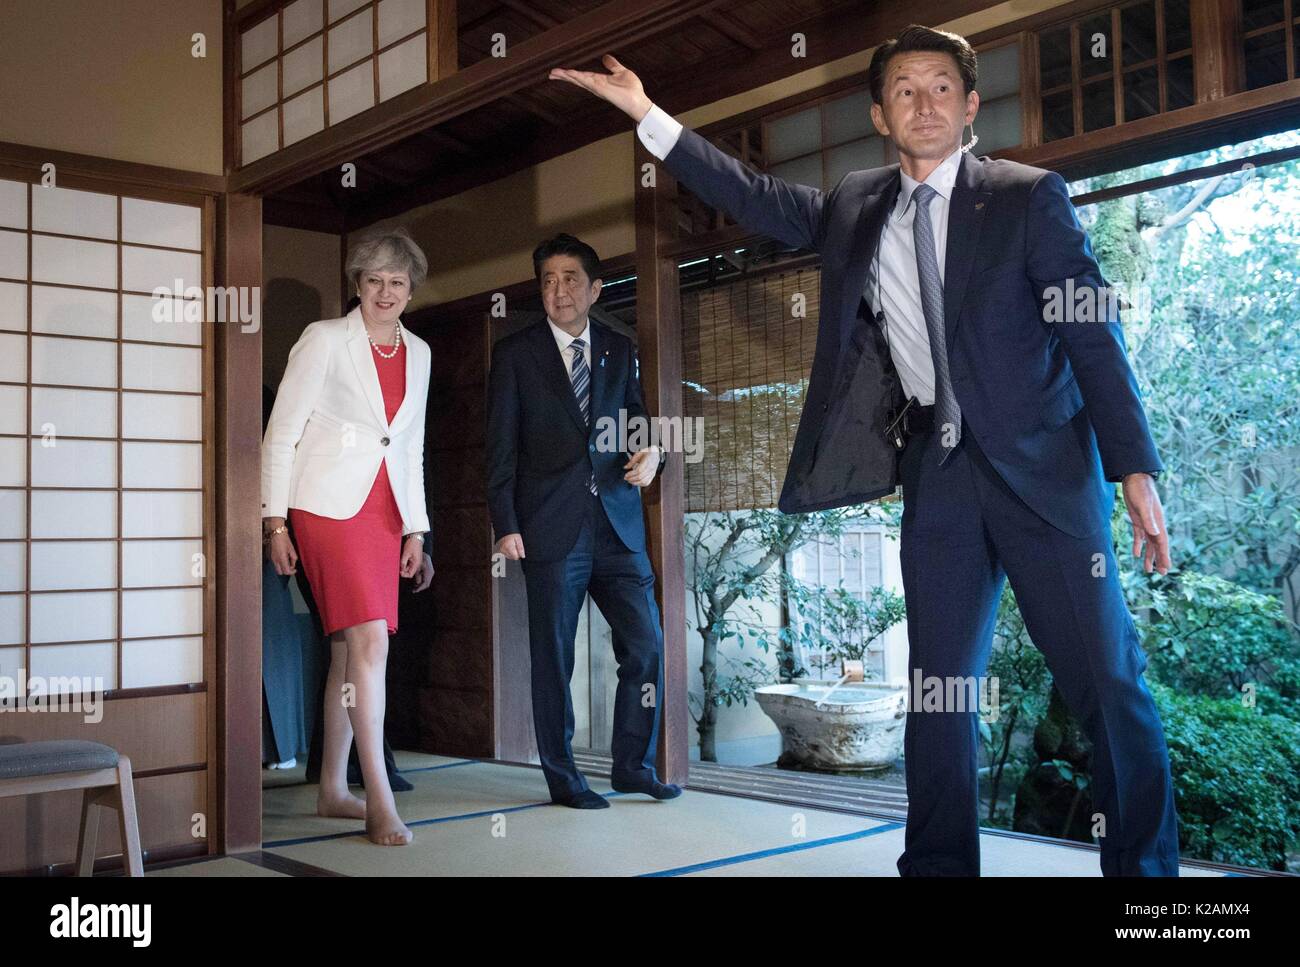 Prime Minister Theresa May during a visit to a Tea House in Kyoto with Prime Minister of Japan Shinzo Abe (centre), during her visit to the country. Stock Photo